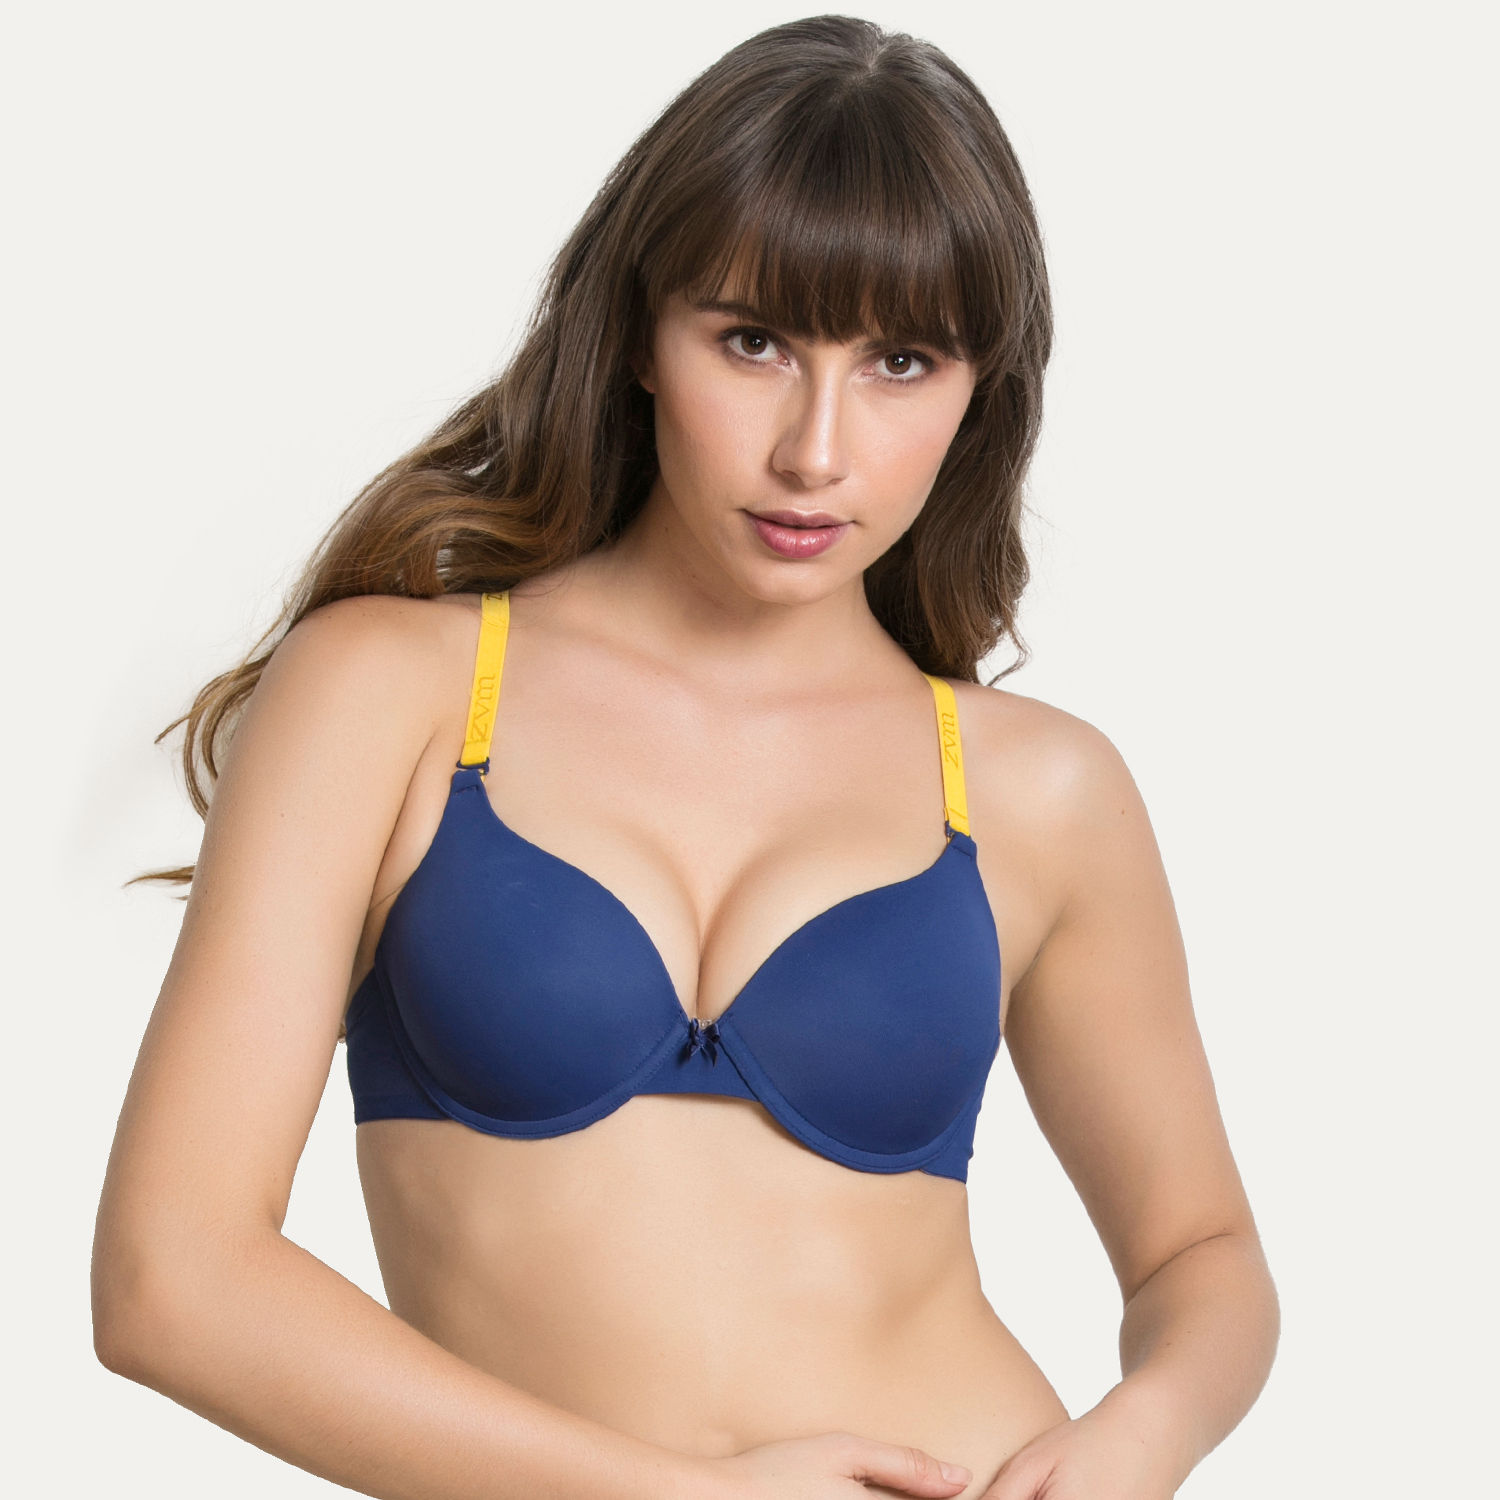 Shyle Navy Blue Y Type Strapped Front Open Bra Panty Set - 36B/L in Chennai  at best price by Genxlead Retail Pvt Ltd (Warehouse) - Justdial